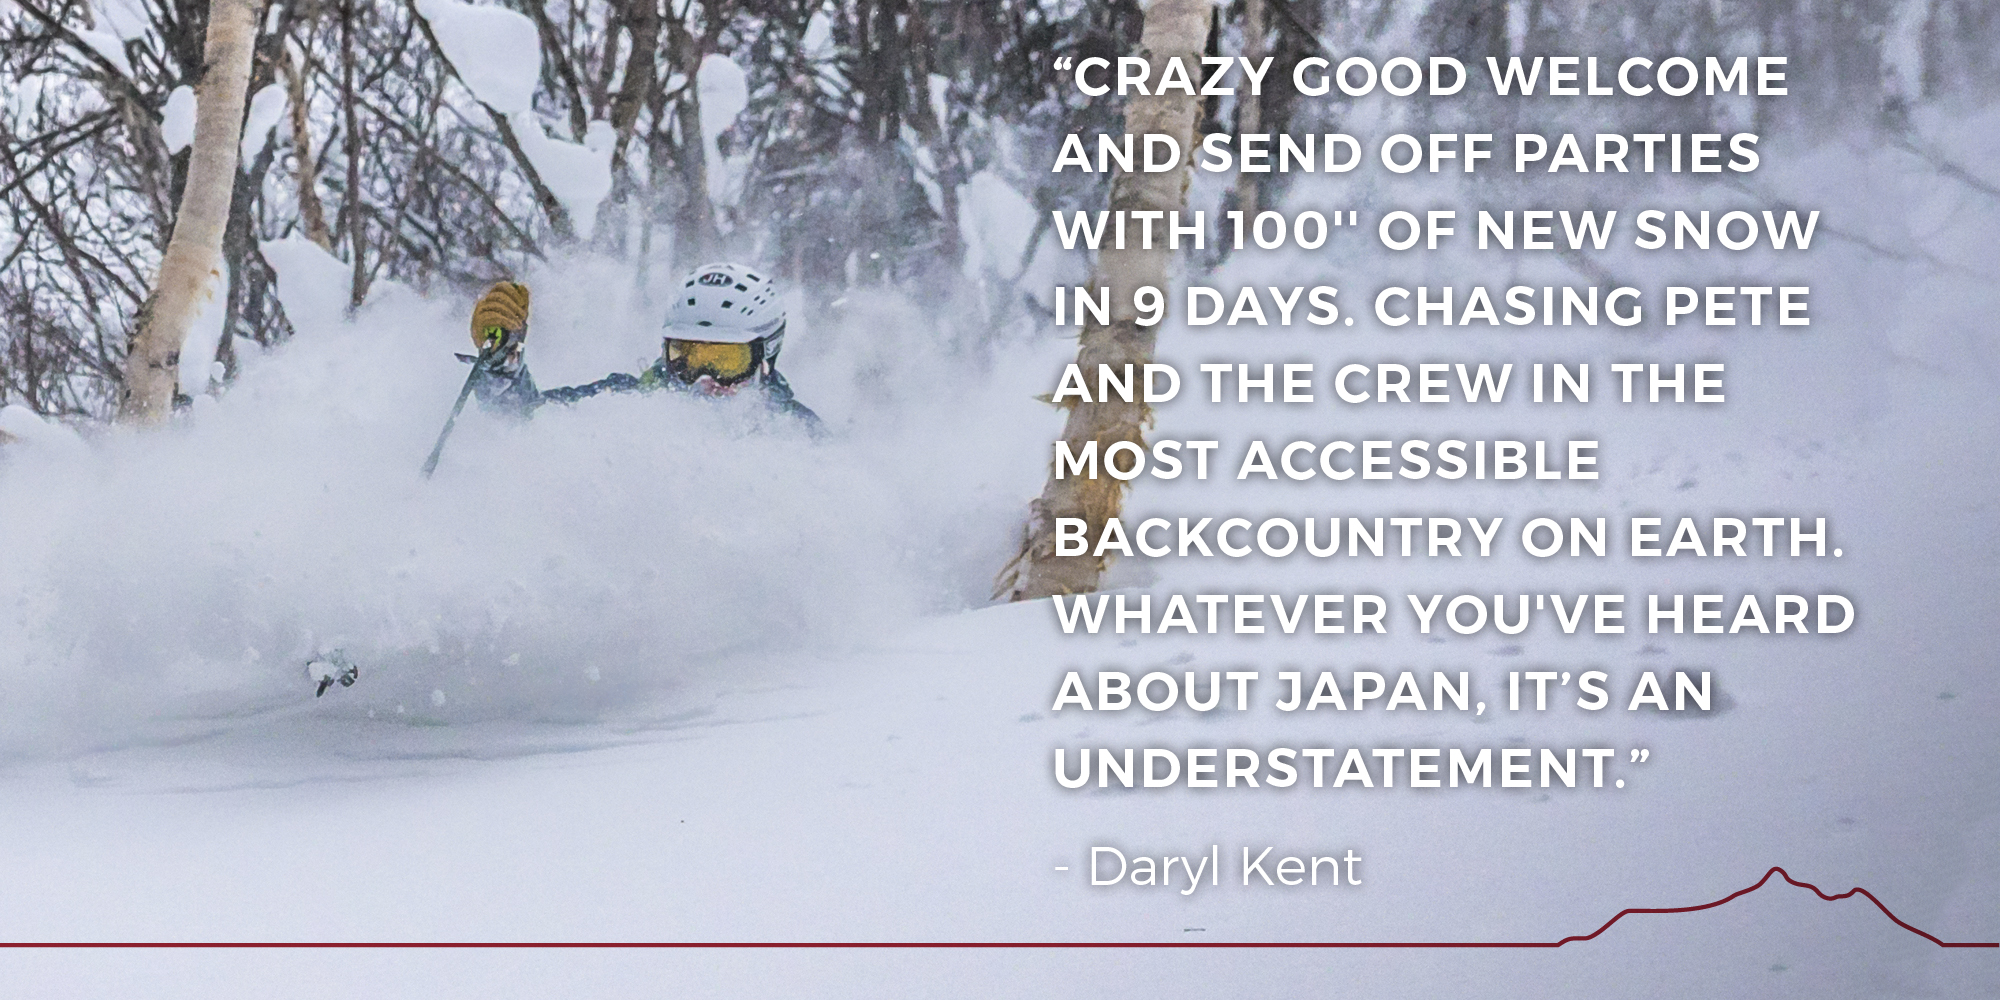 Crazy good welcome and send off parties with 100'' of new snow in 9 days. Chasing Pete and the crew in the most accessible backcountry on earth. Whatever you've heard about Japan, it’s an understatement. -- Daryl kent